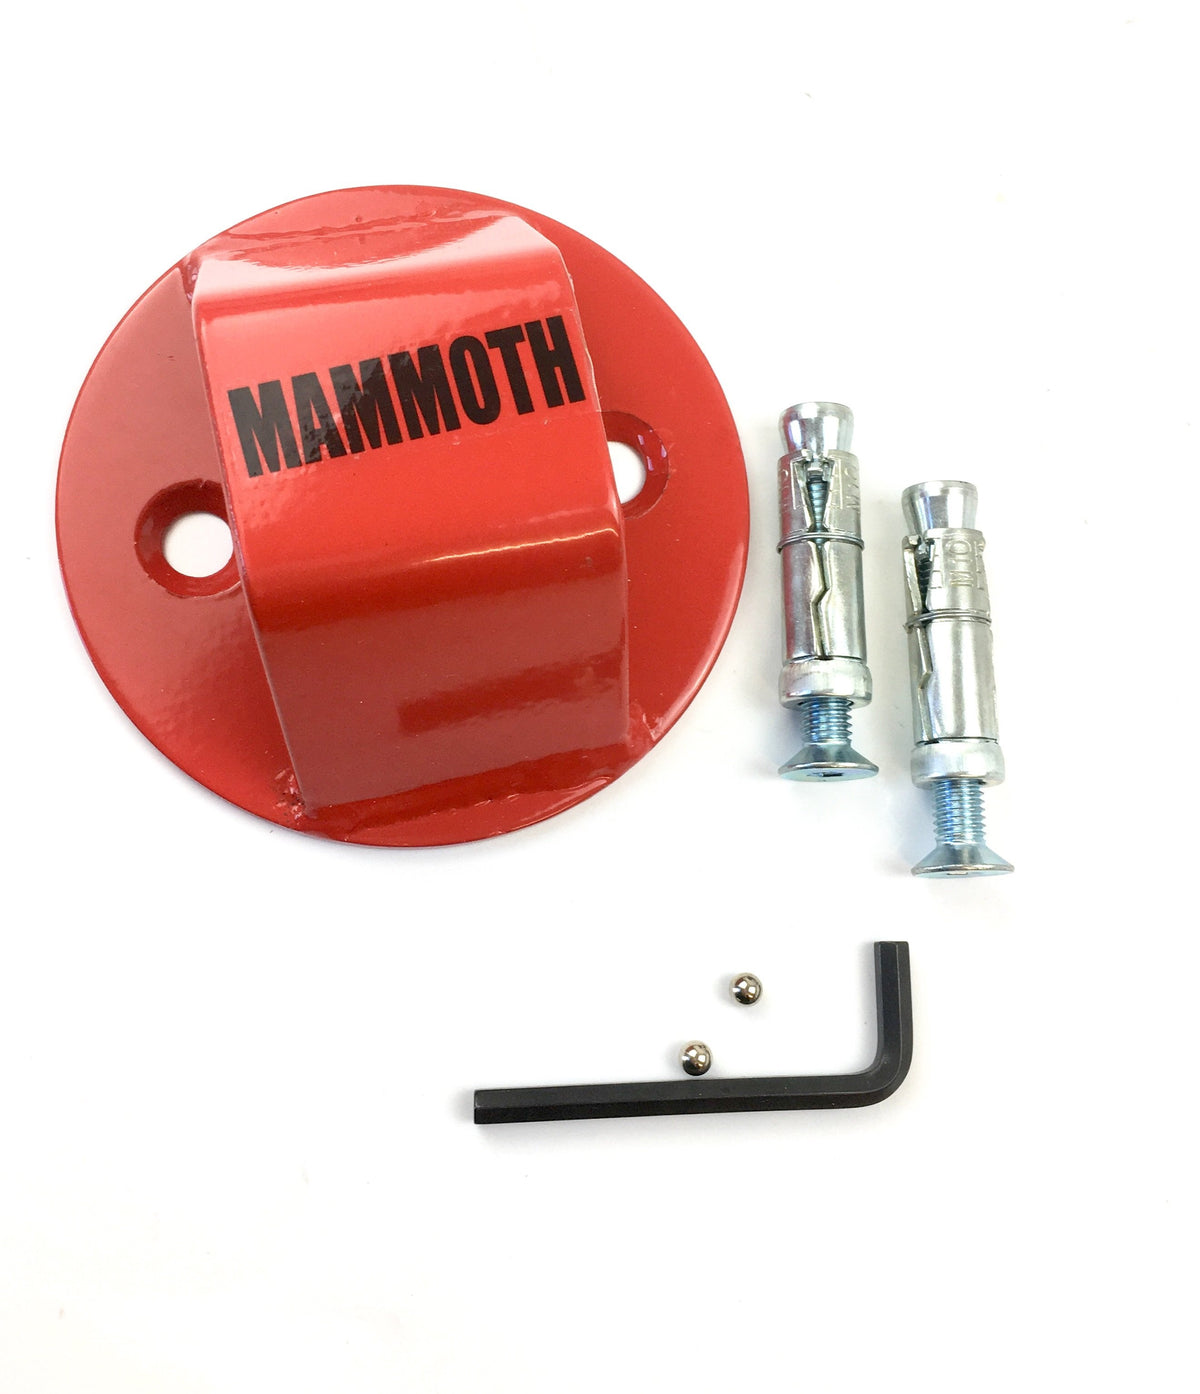 Motorcycle Motorbike Scooter Bike Mammoth Junior 2 Bolt In Security Ground Anchor